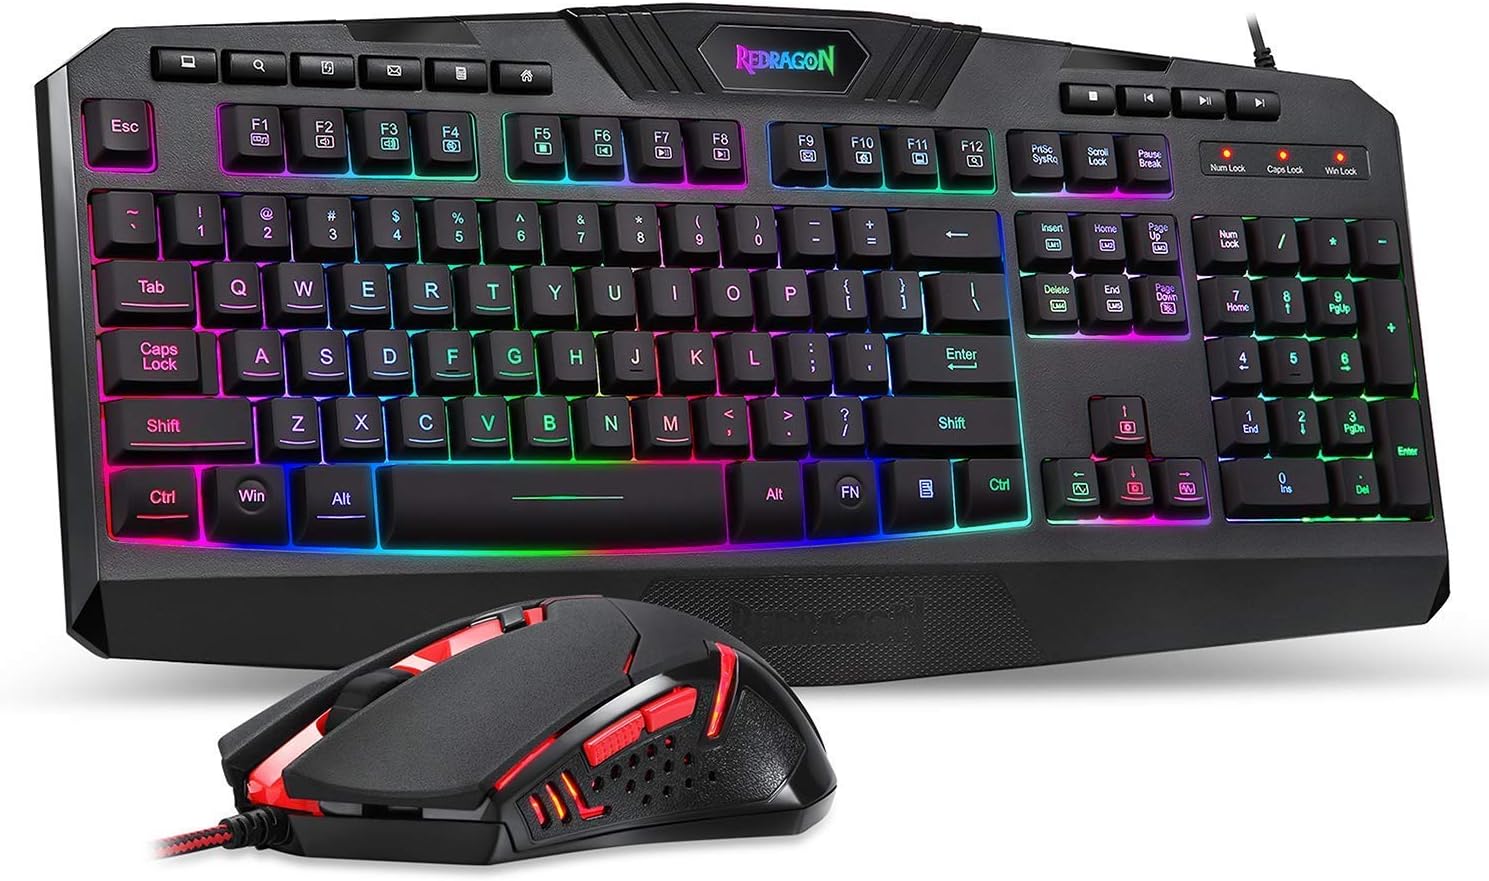 Redragon S101 Gaming Keyboard, M601 Mouse, RGB Backlit Gaming Keyboard, Programmable Backlit Gaming Mouse, Value Combo Set [New Version]